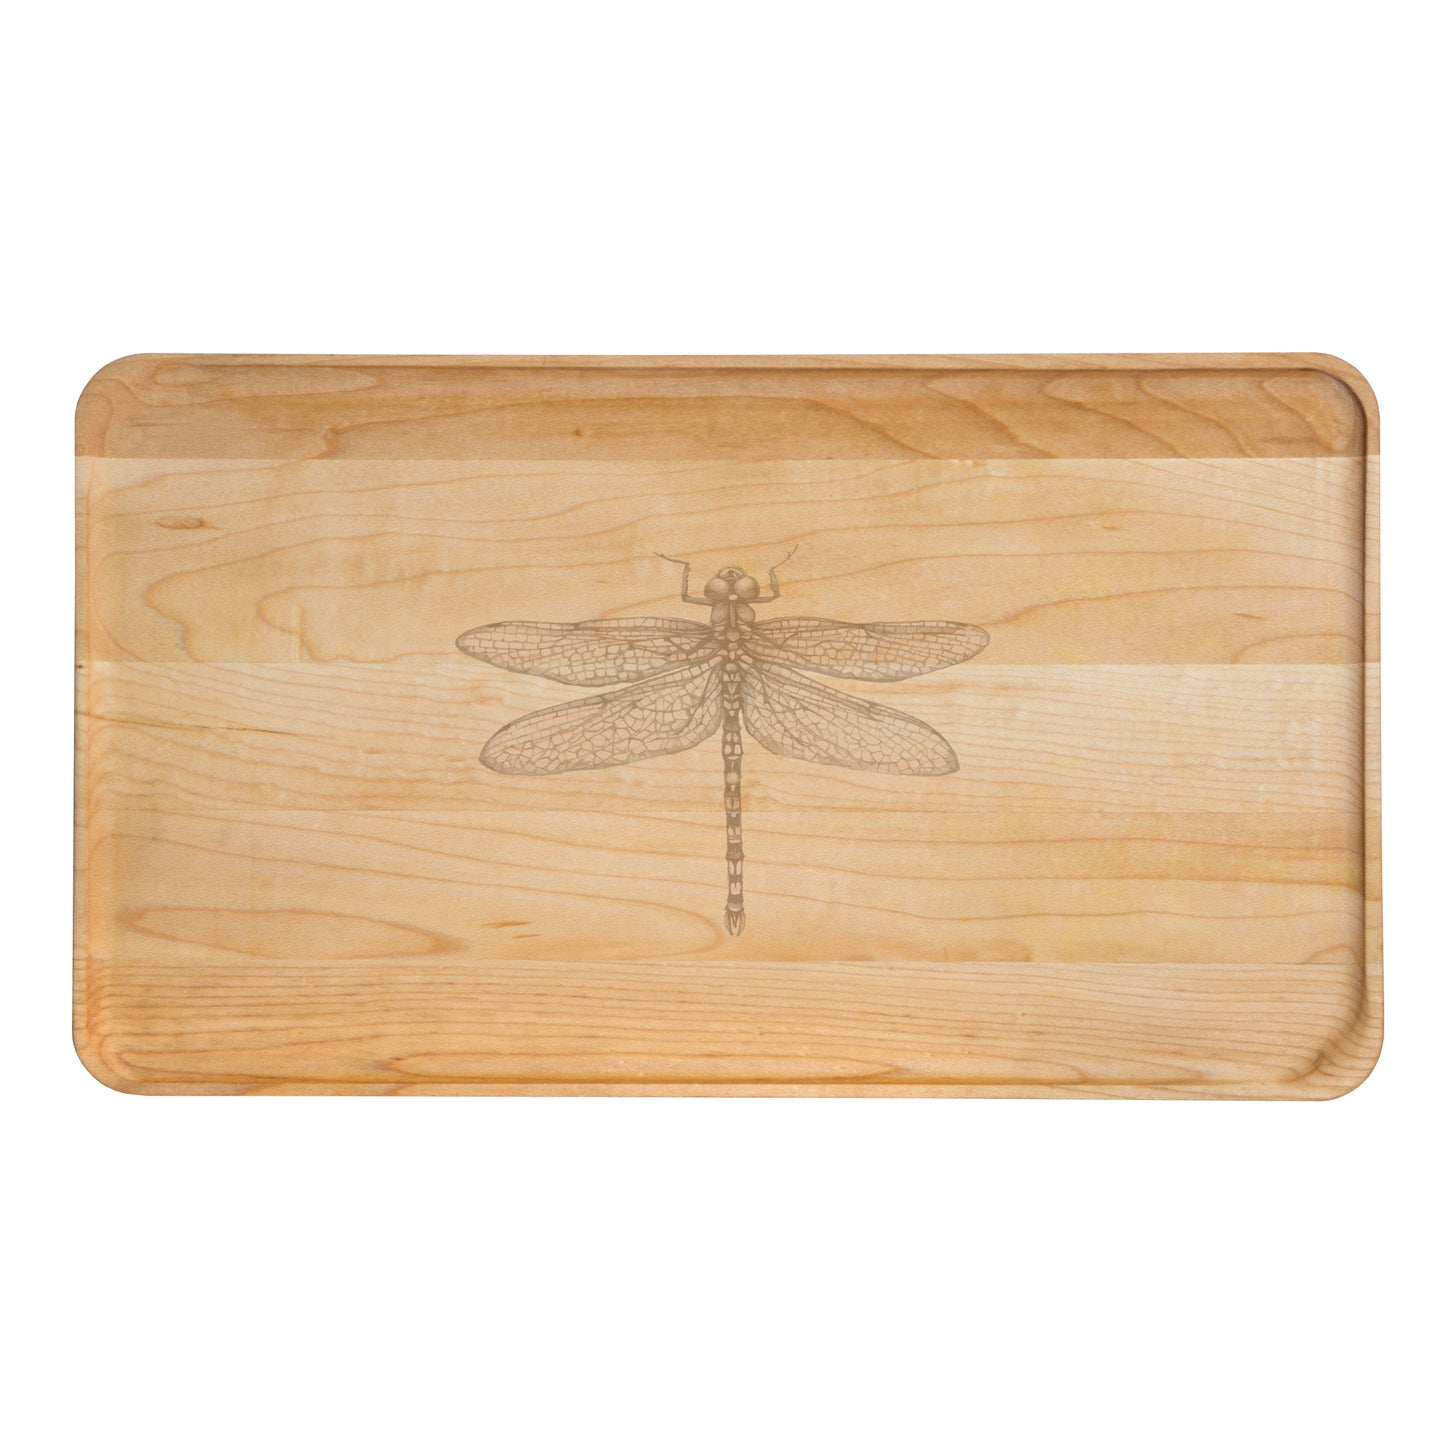 Laura Zindel Large Maple Appetizer Plate - More designs available